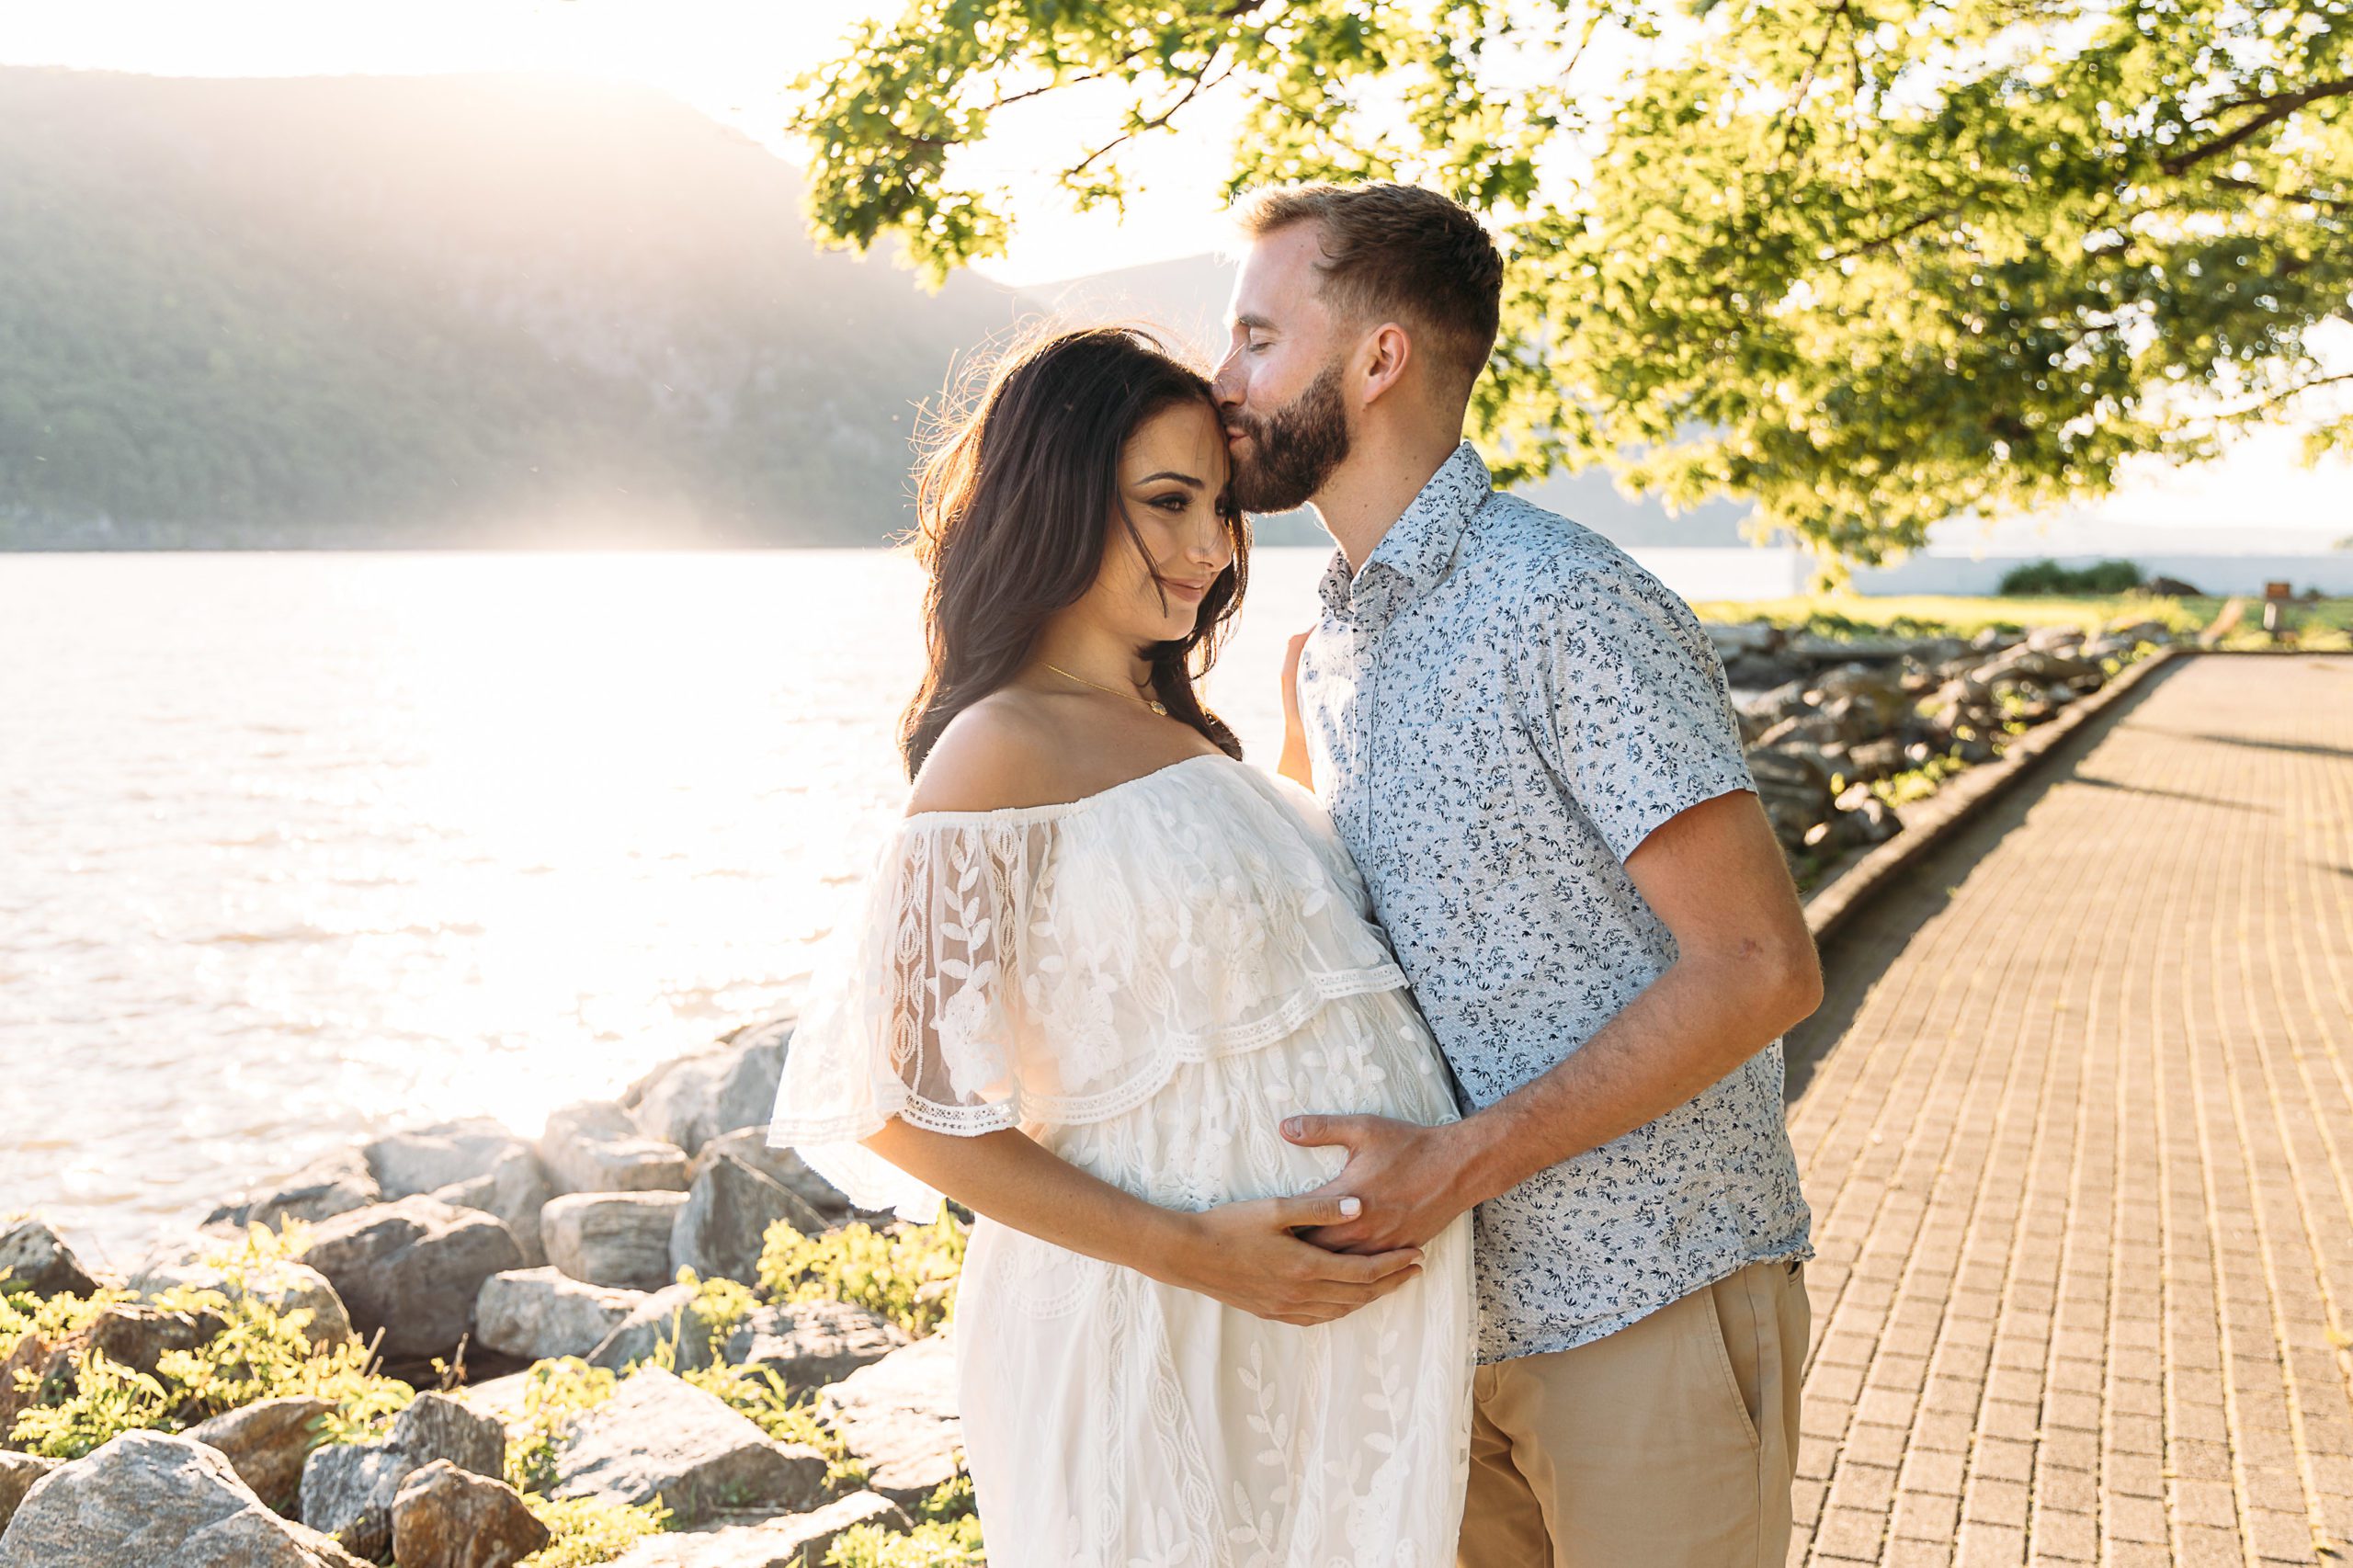 Outdoor couple maternity photoshoot at the beach in beautiful white flowy white lace maternity dress